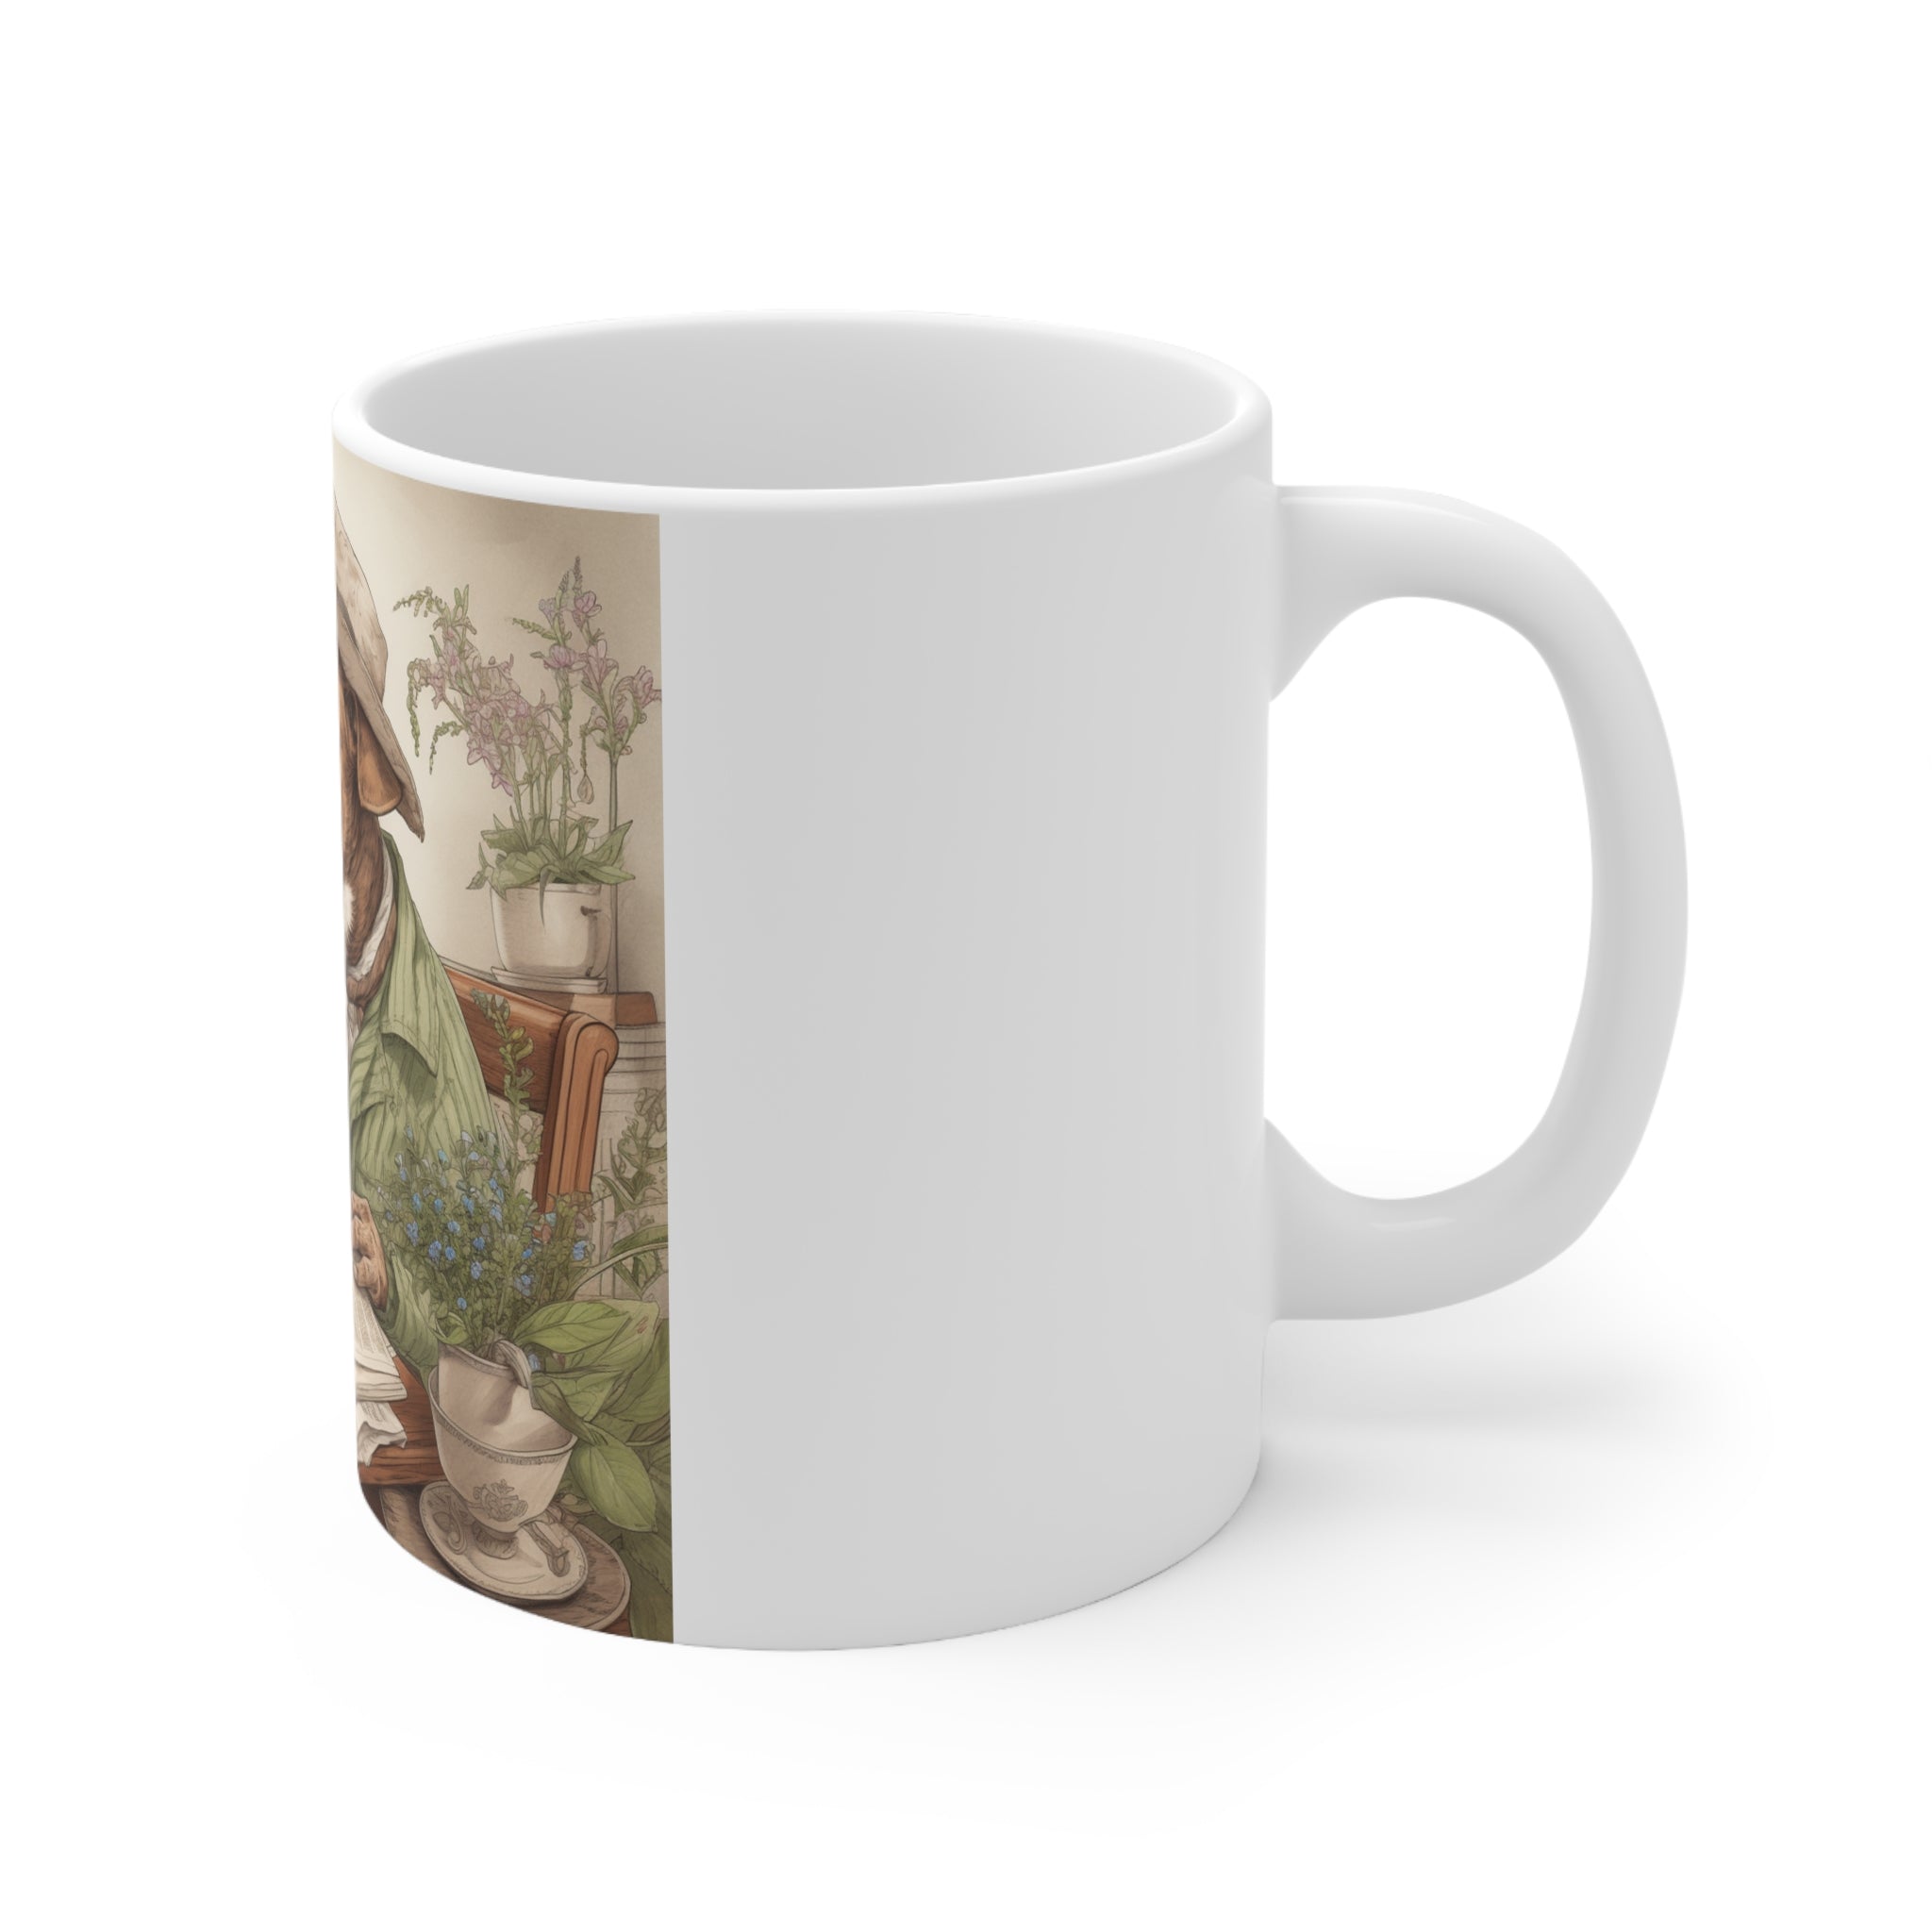 Dog Lovers Coffee Mug 11oz Ceramic Mug Home and Garden Relaxing  | Exclusive Floral Puppy Design | Professional Artwork | Durable & Aesthetic Drinkware